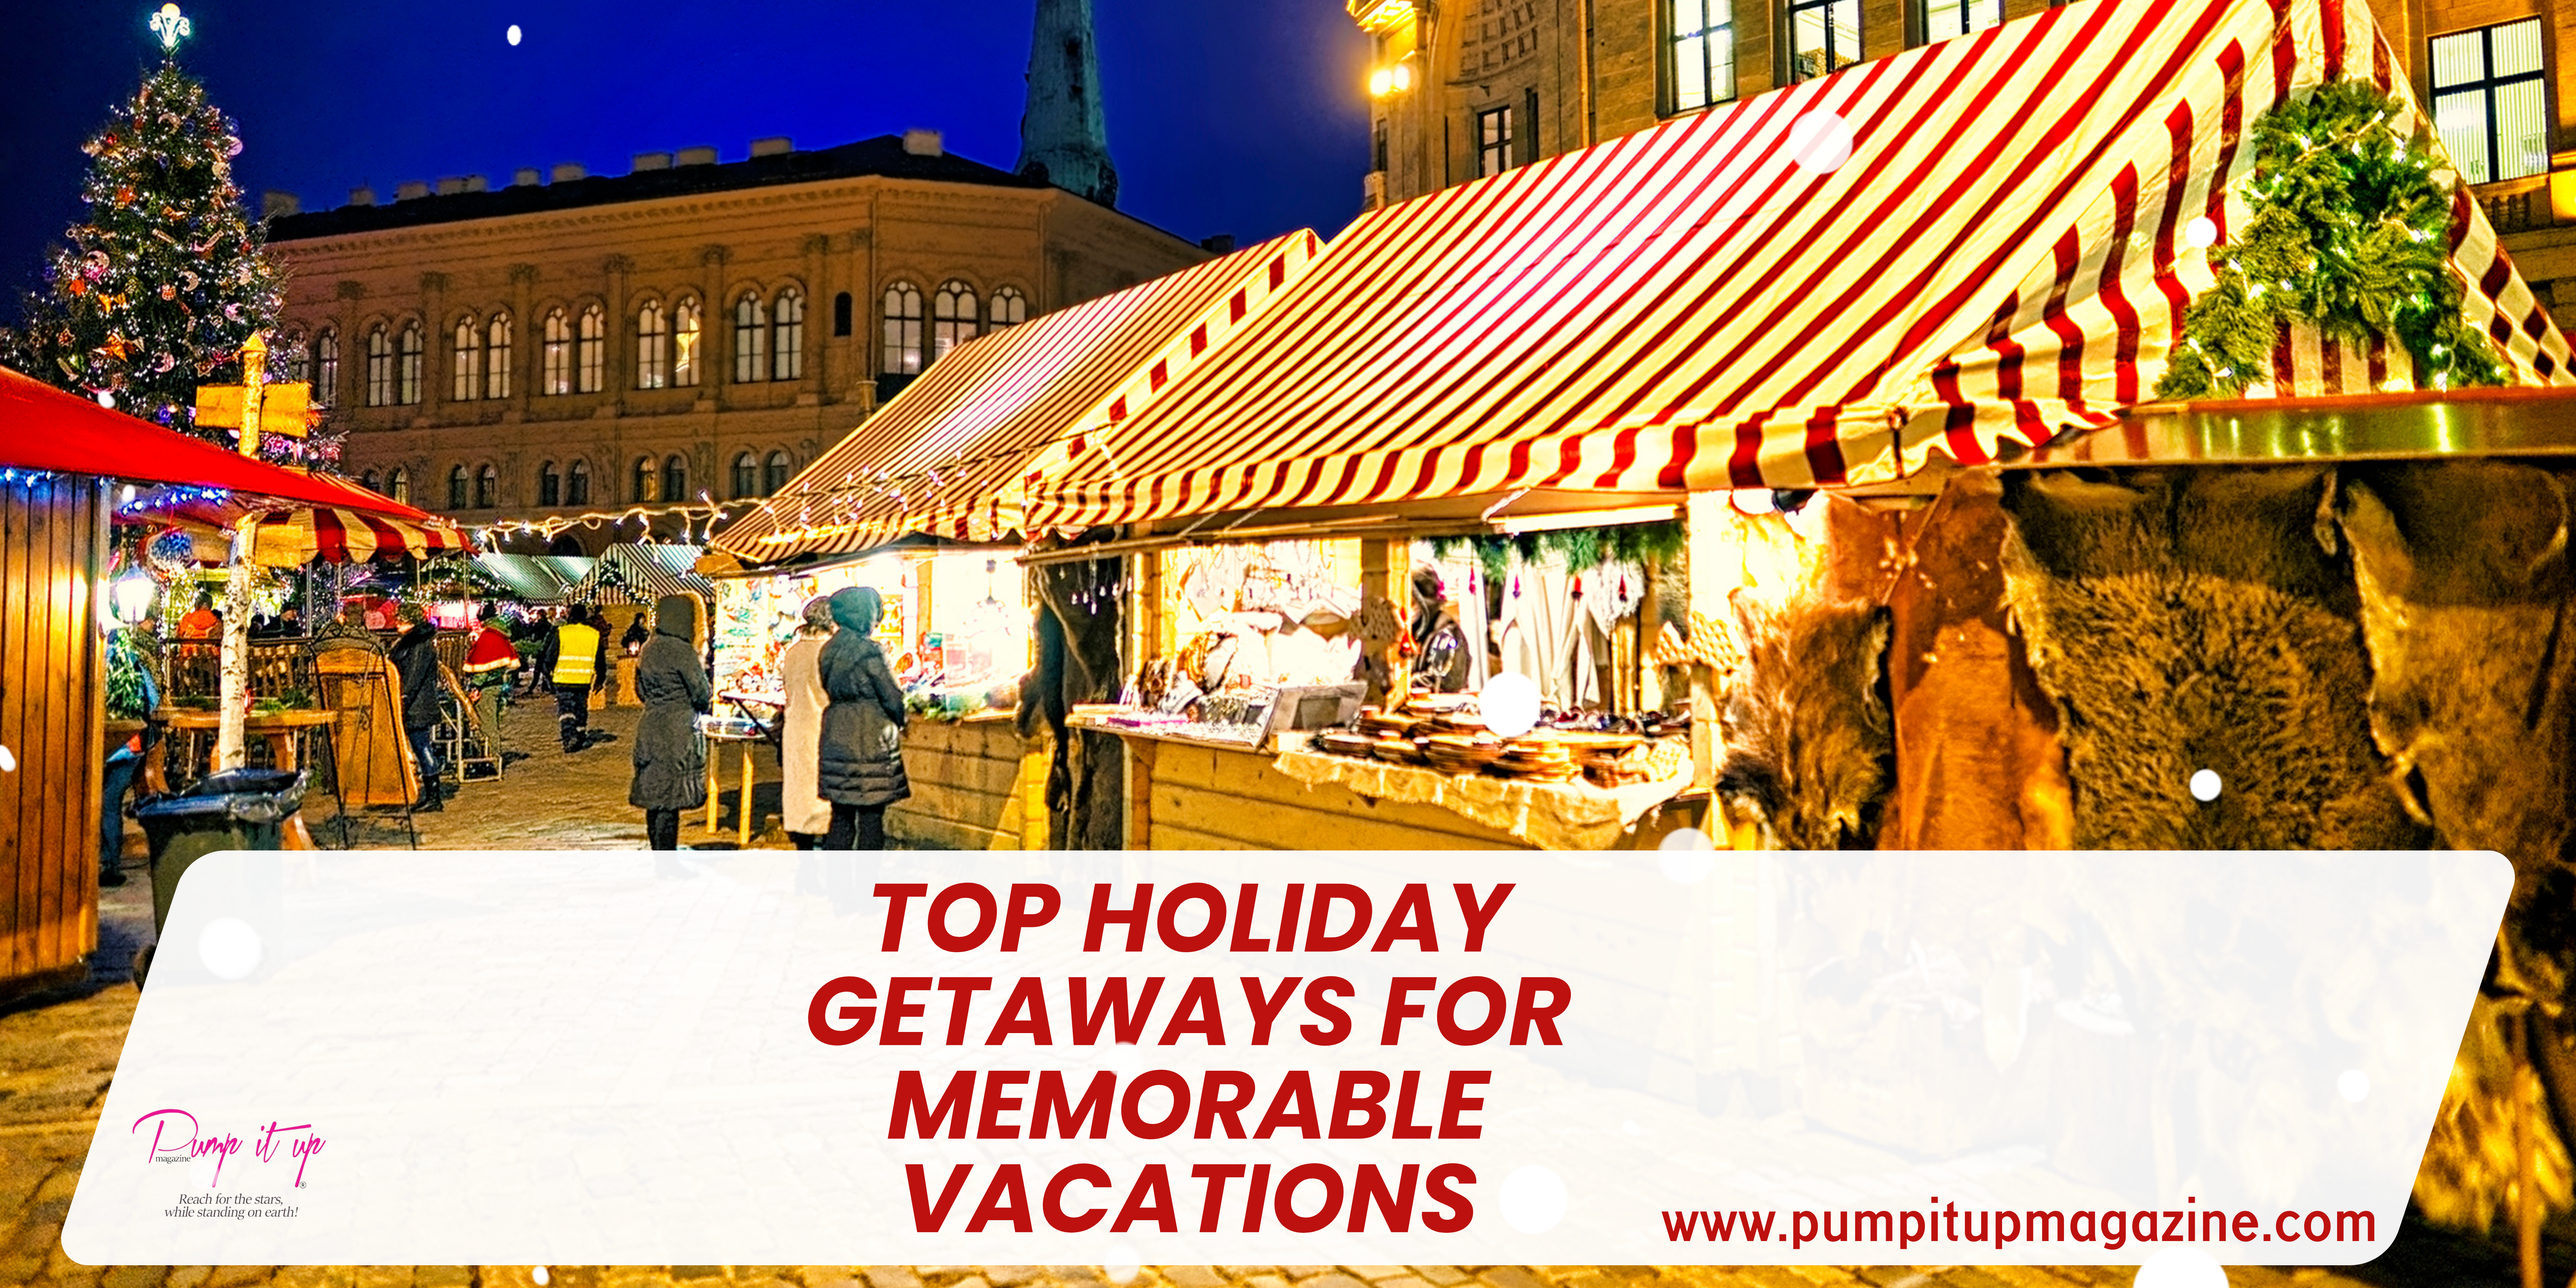 Top Holiday Getaways for Memorable Vacations